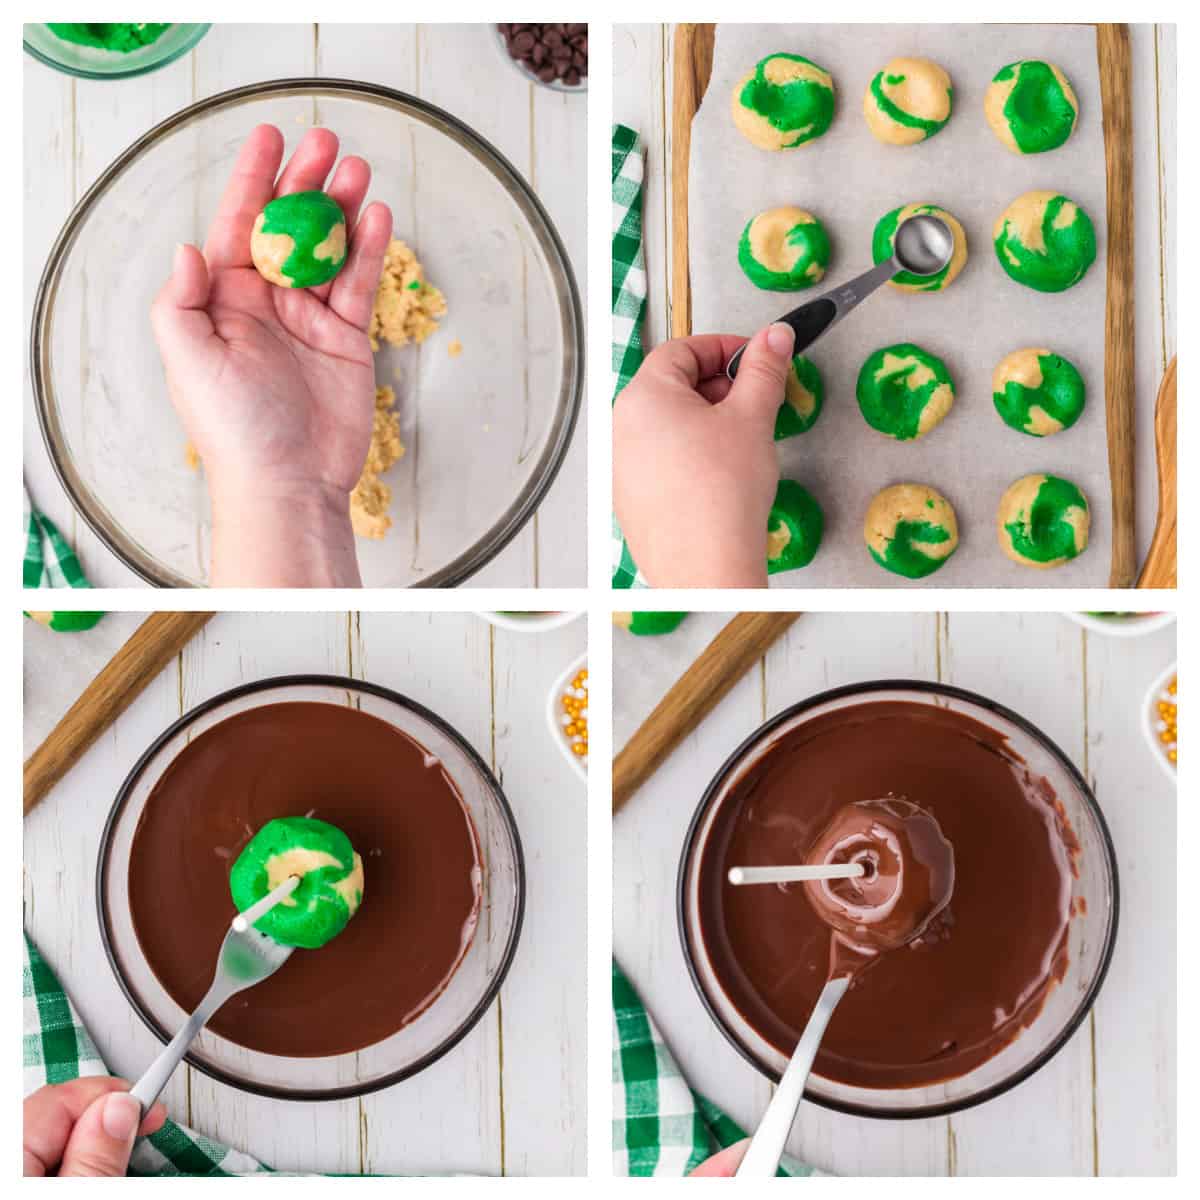 Collage showing how to make St. Patrick's Day cookie pops.